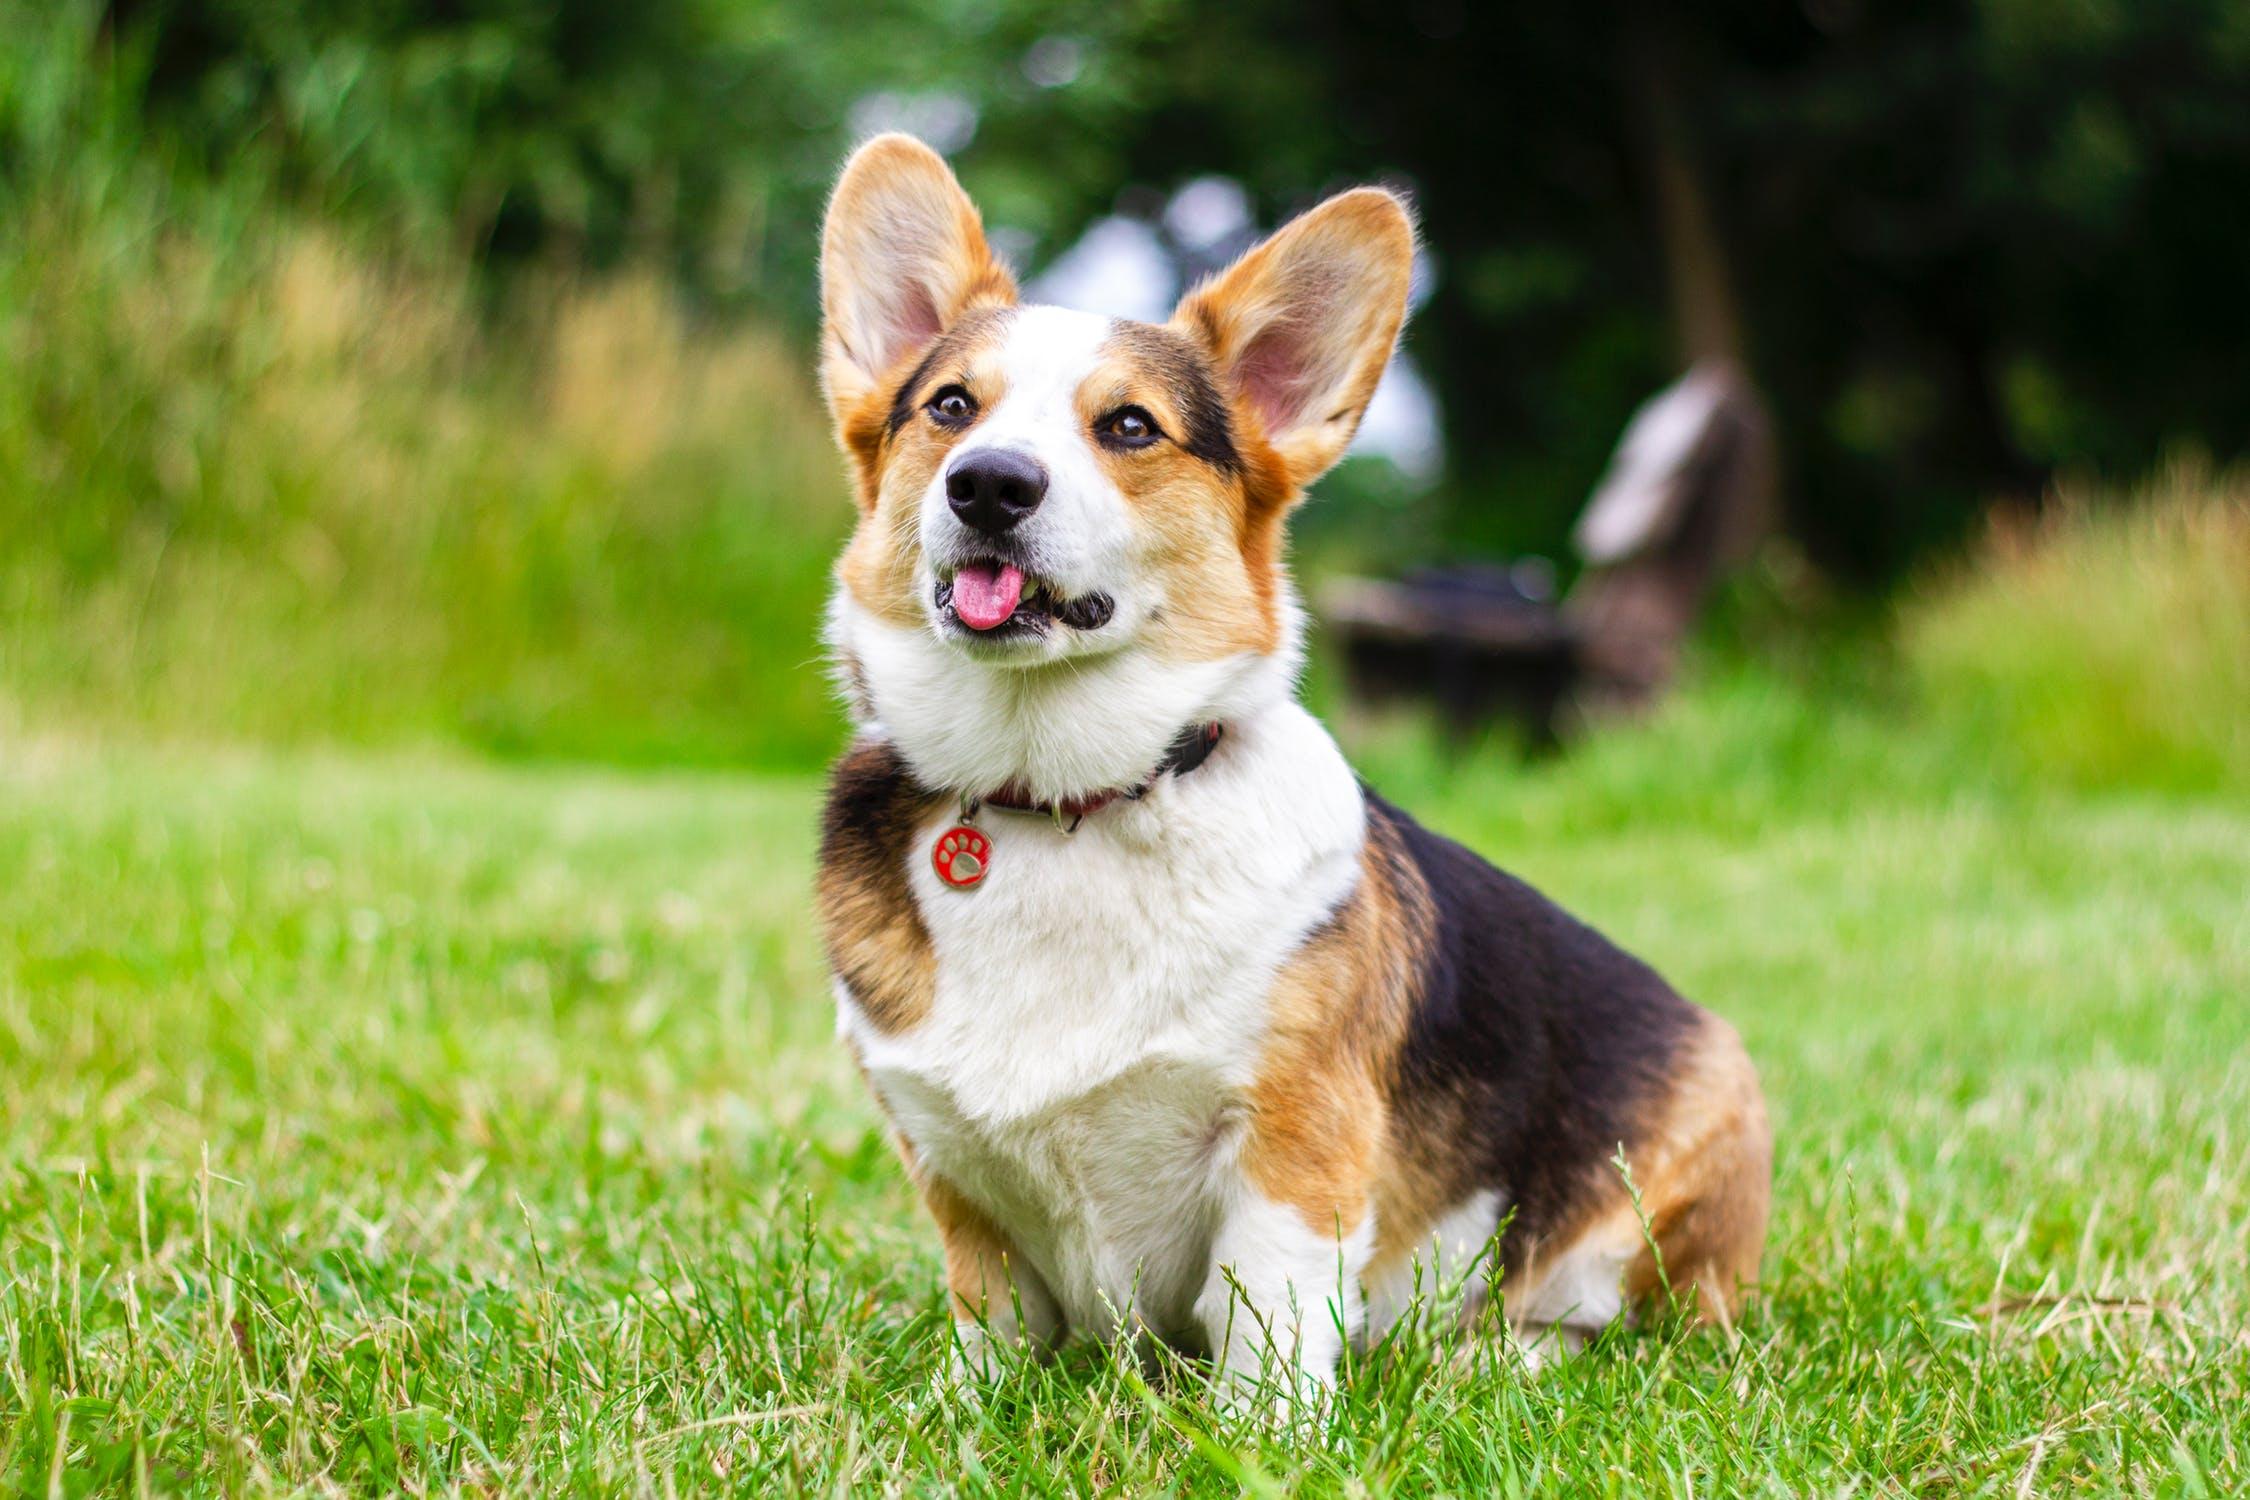 How to take care and hygiene of Corgi dogs